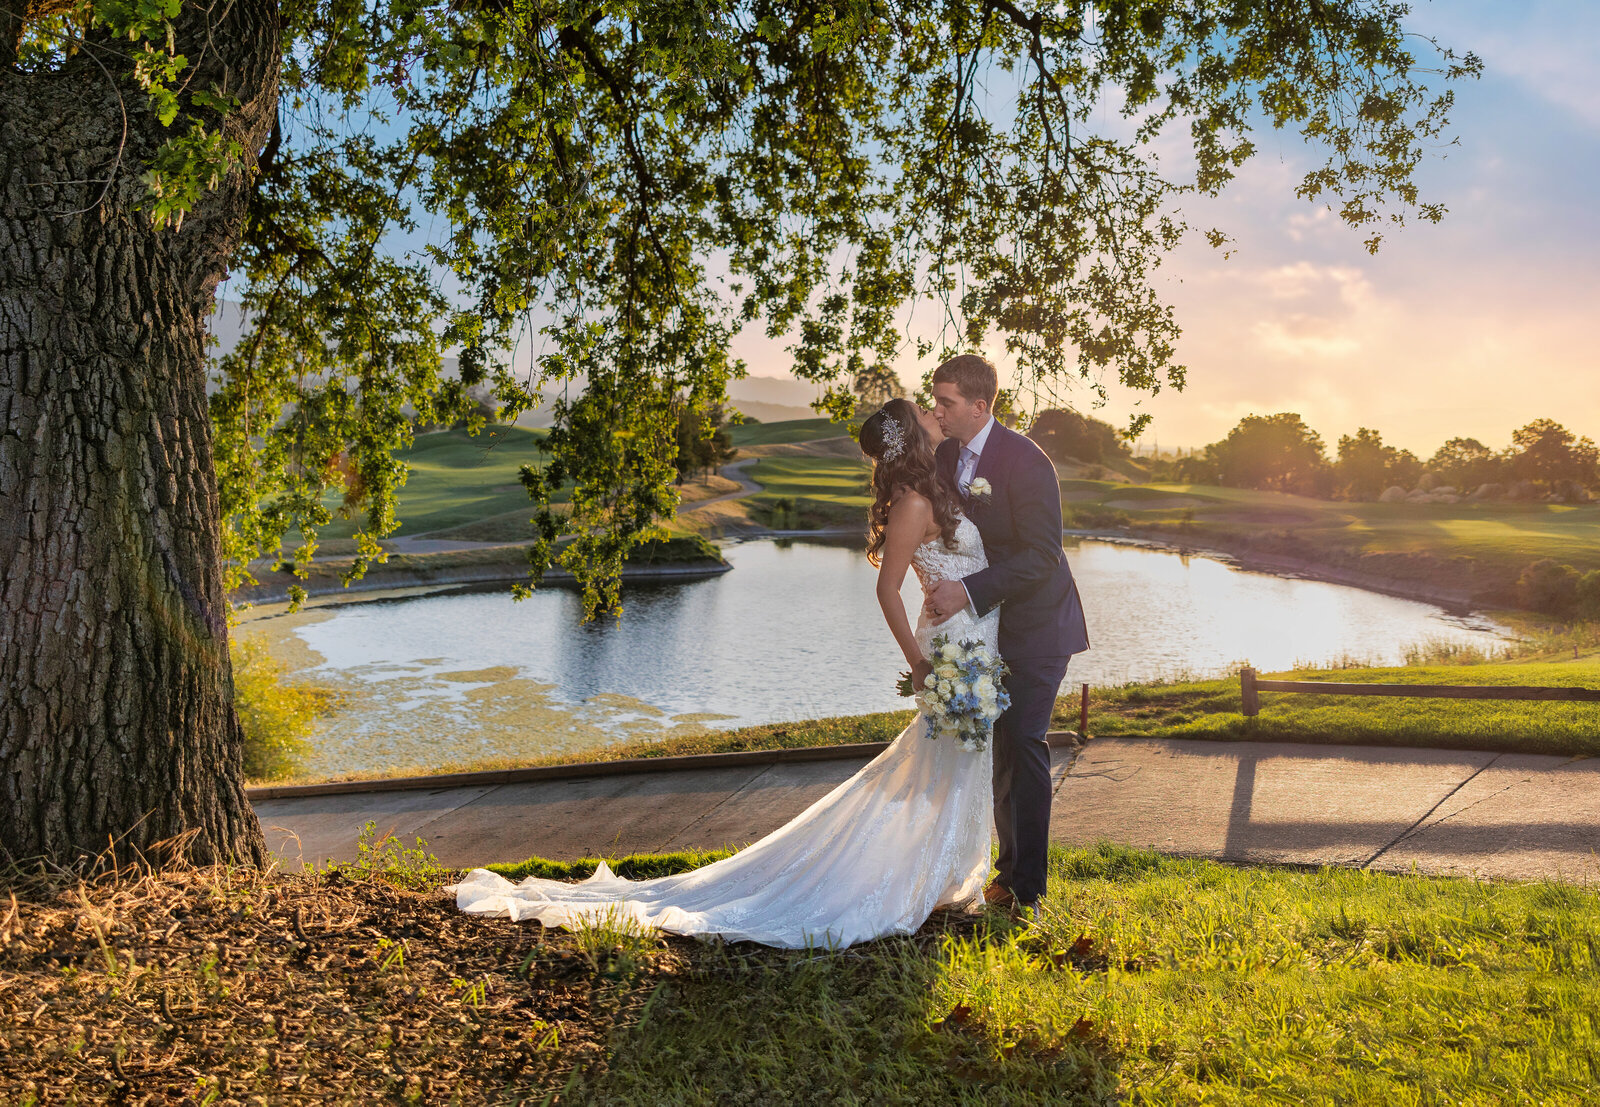 Bride and groom kiss under a willow tree with lake in the background with sunset. Photo by philippe studio pro, sacramento wedding photographer.